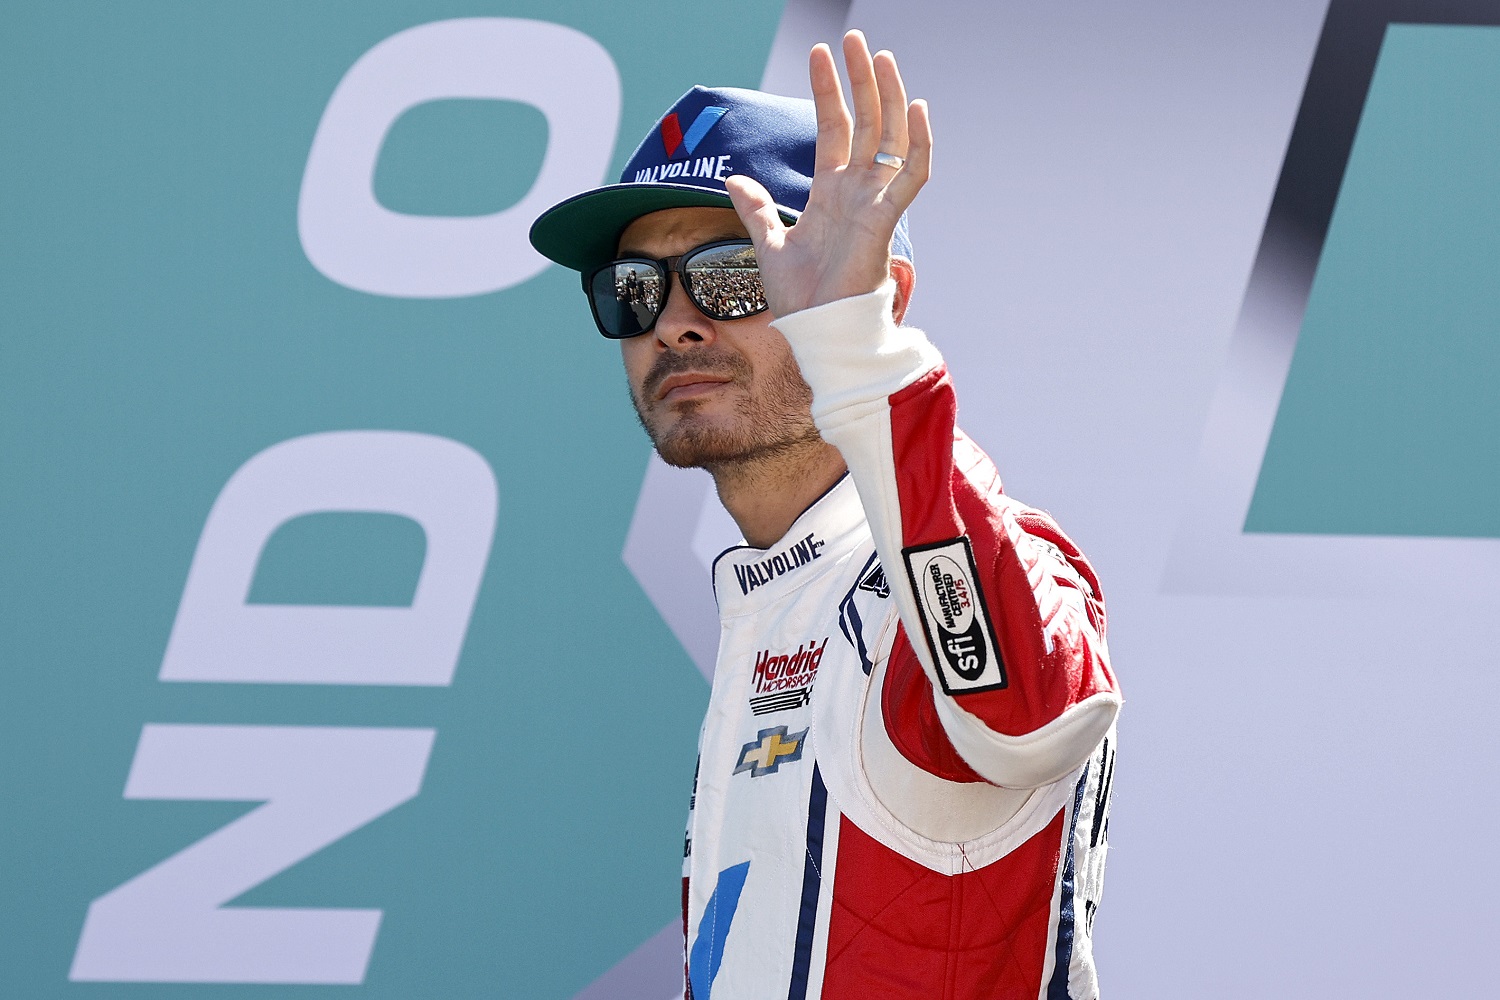 Kyle Larson waves to fans as he walks onstage during driver intros to the NASCAR Cup Series Dixie Vodka 400 at Homestead-Miami Speedway on Oct. 23, 2022 in Homestead, Florida.